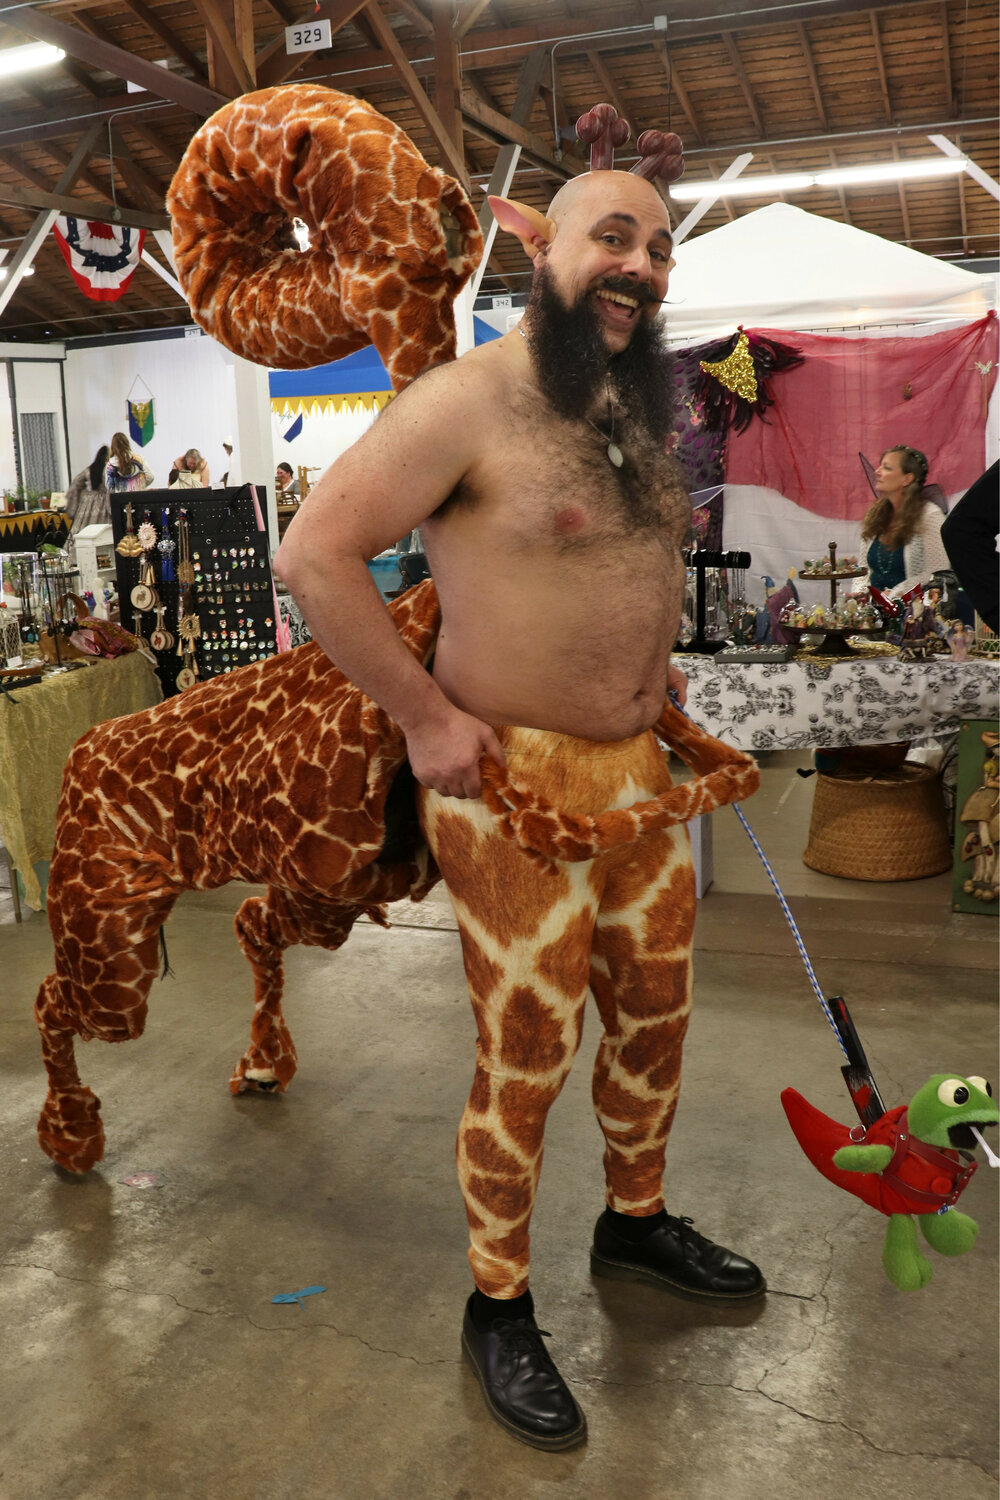 Ethan Siegel shows off his giraffe centaur costume during the Centralia Fantasy Festival at the Southwest Washington Fairgrounds in Chehalis on Saturday, May 27.